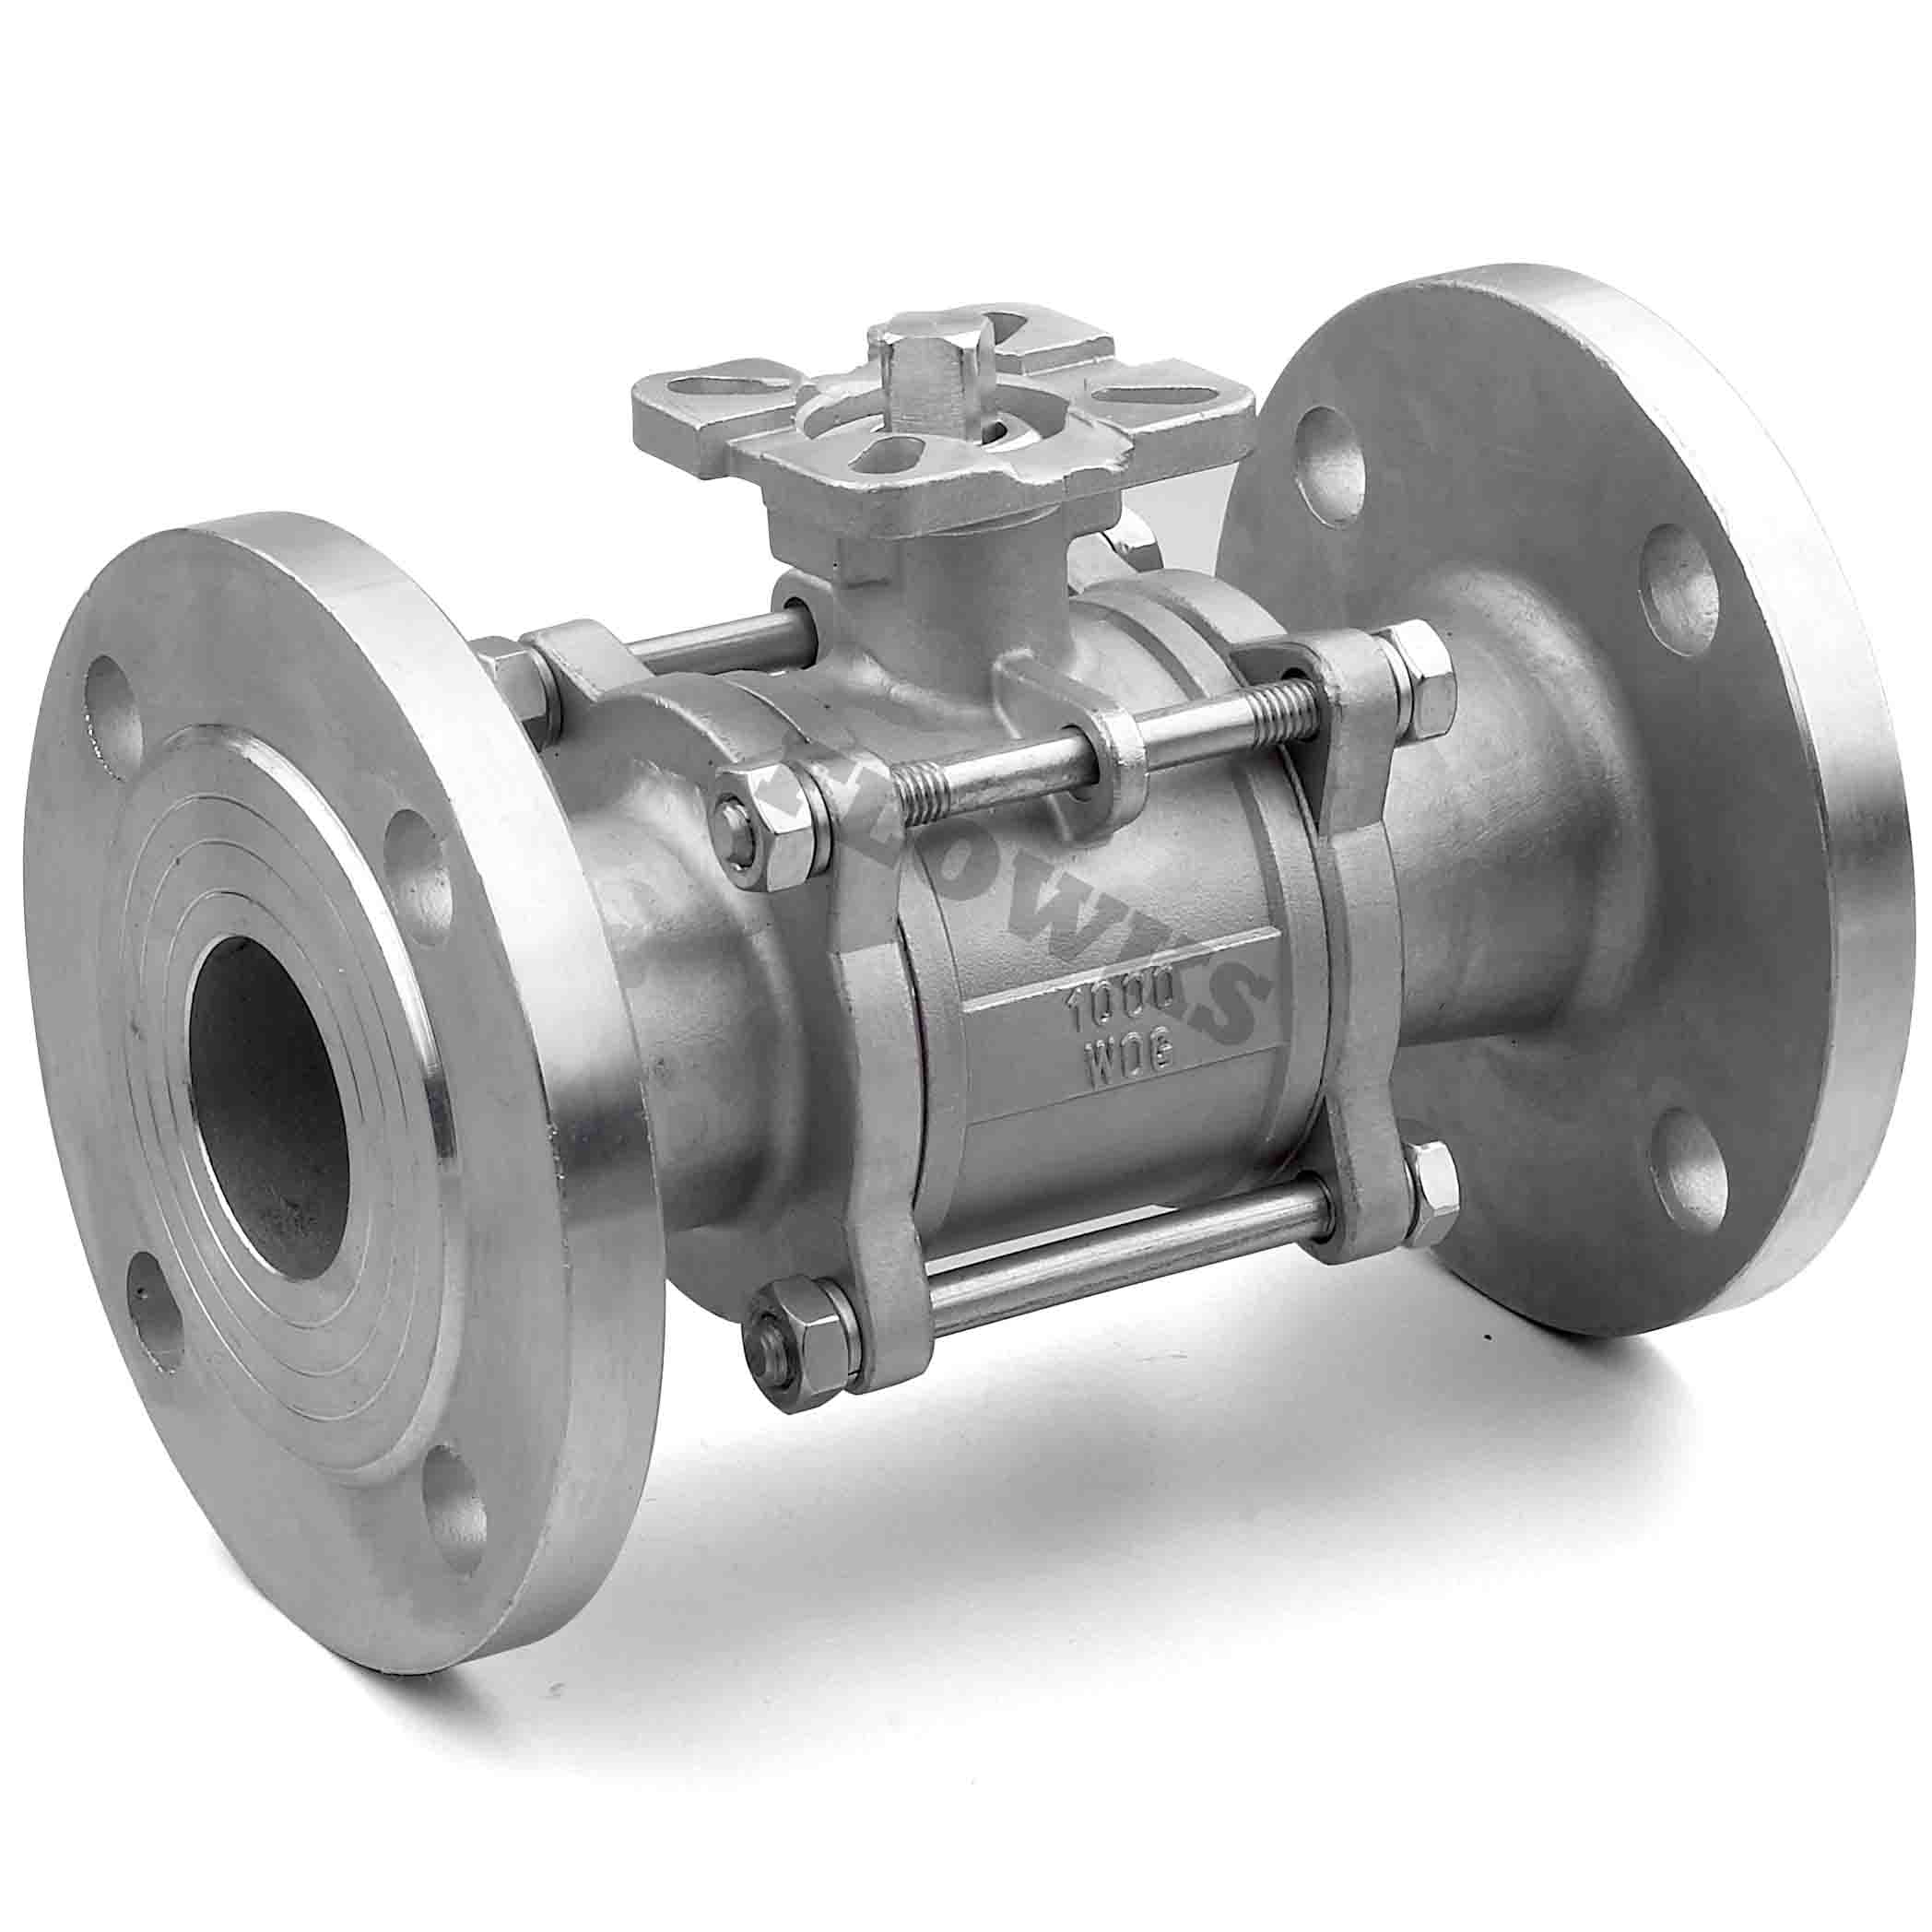 3 PC Flanged Ball Valve with ISO Mounting Pad